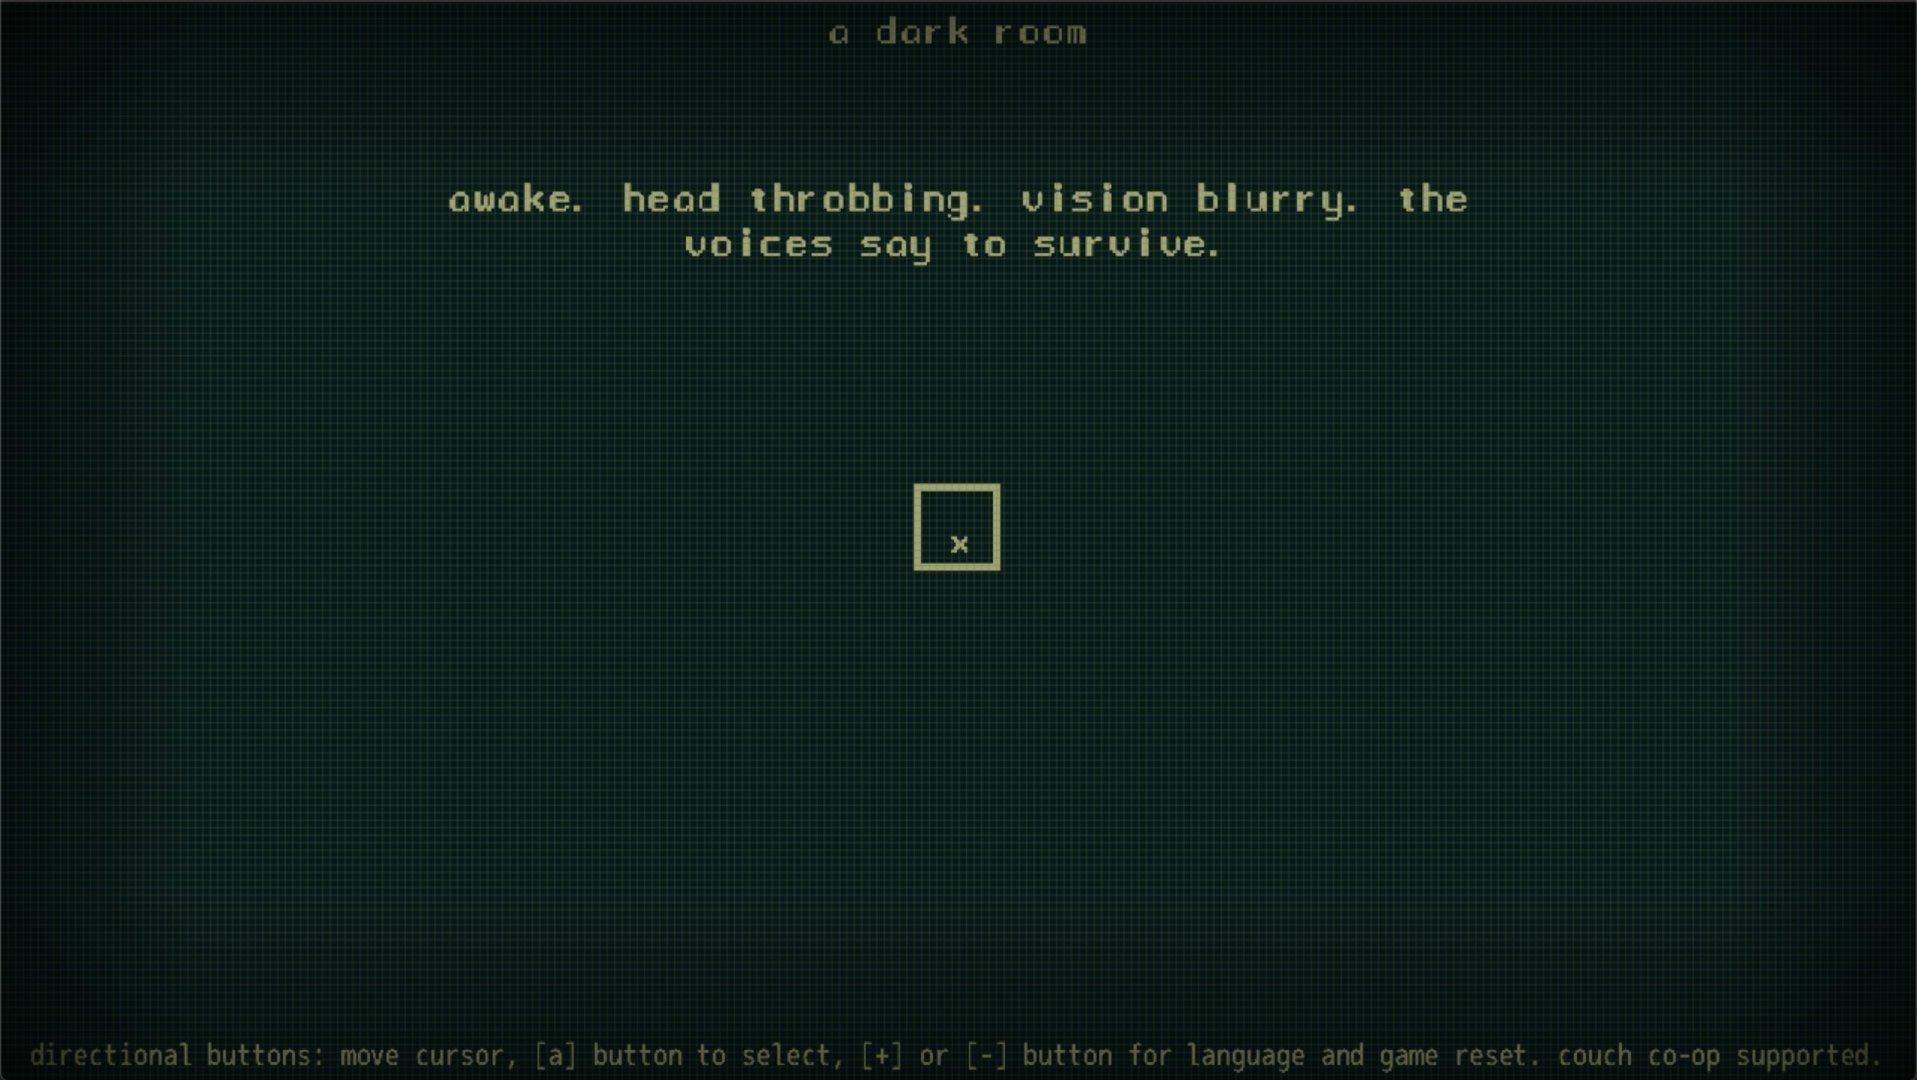 best free web browser games - text based game A Dark Room.  the text on the screen reads 